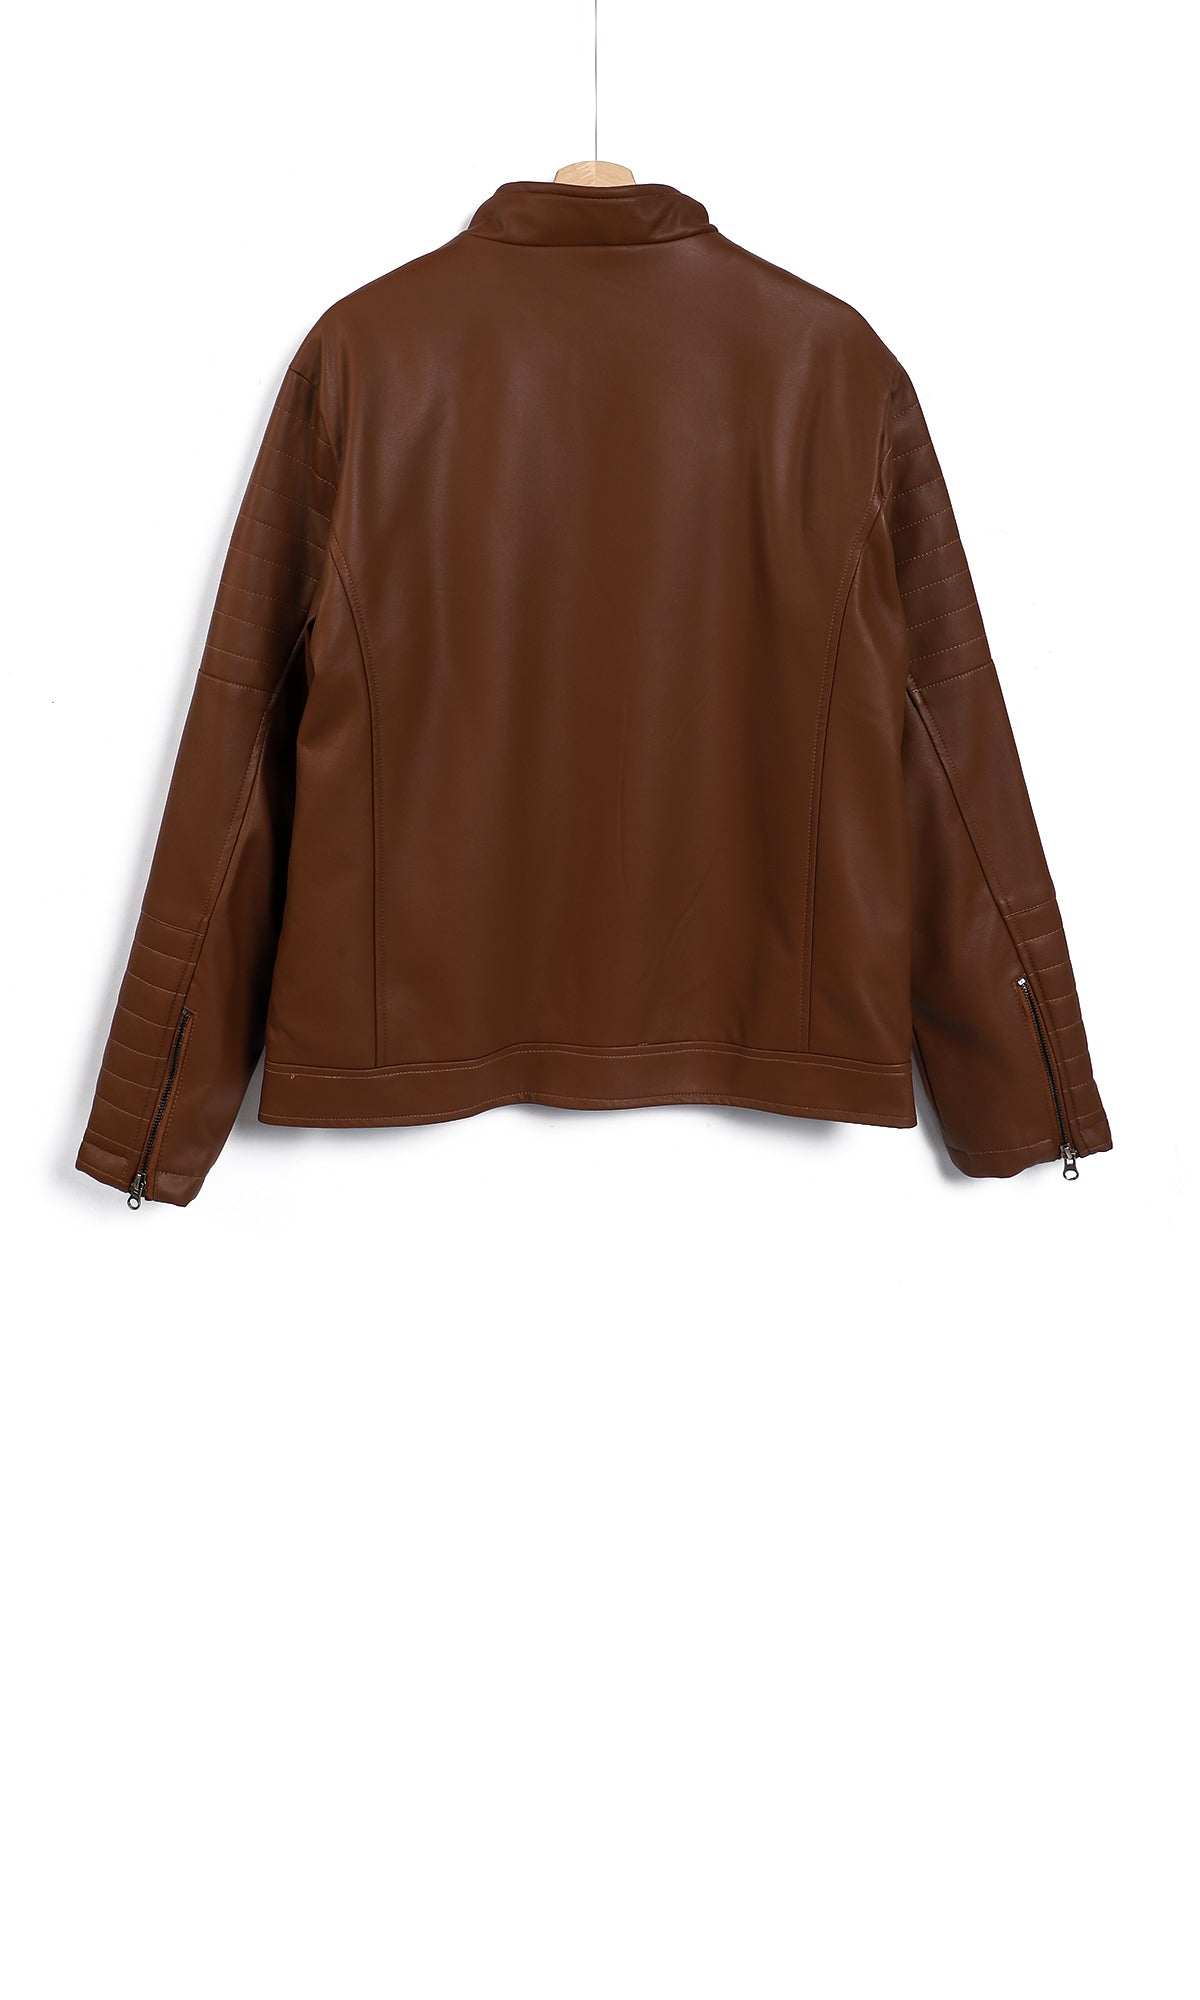 O156167 Stitched Zip Through Neck Jacket With Side Zipper Pocket - Gingerbread Brown